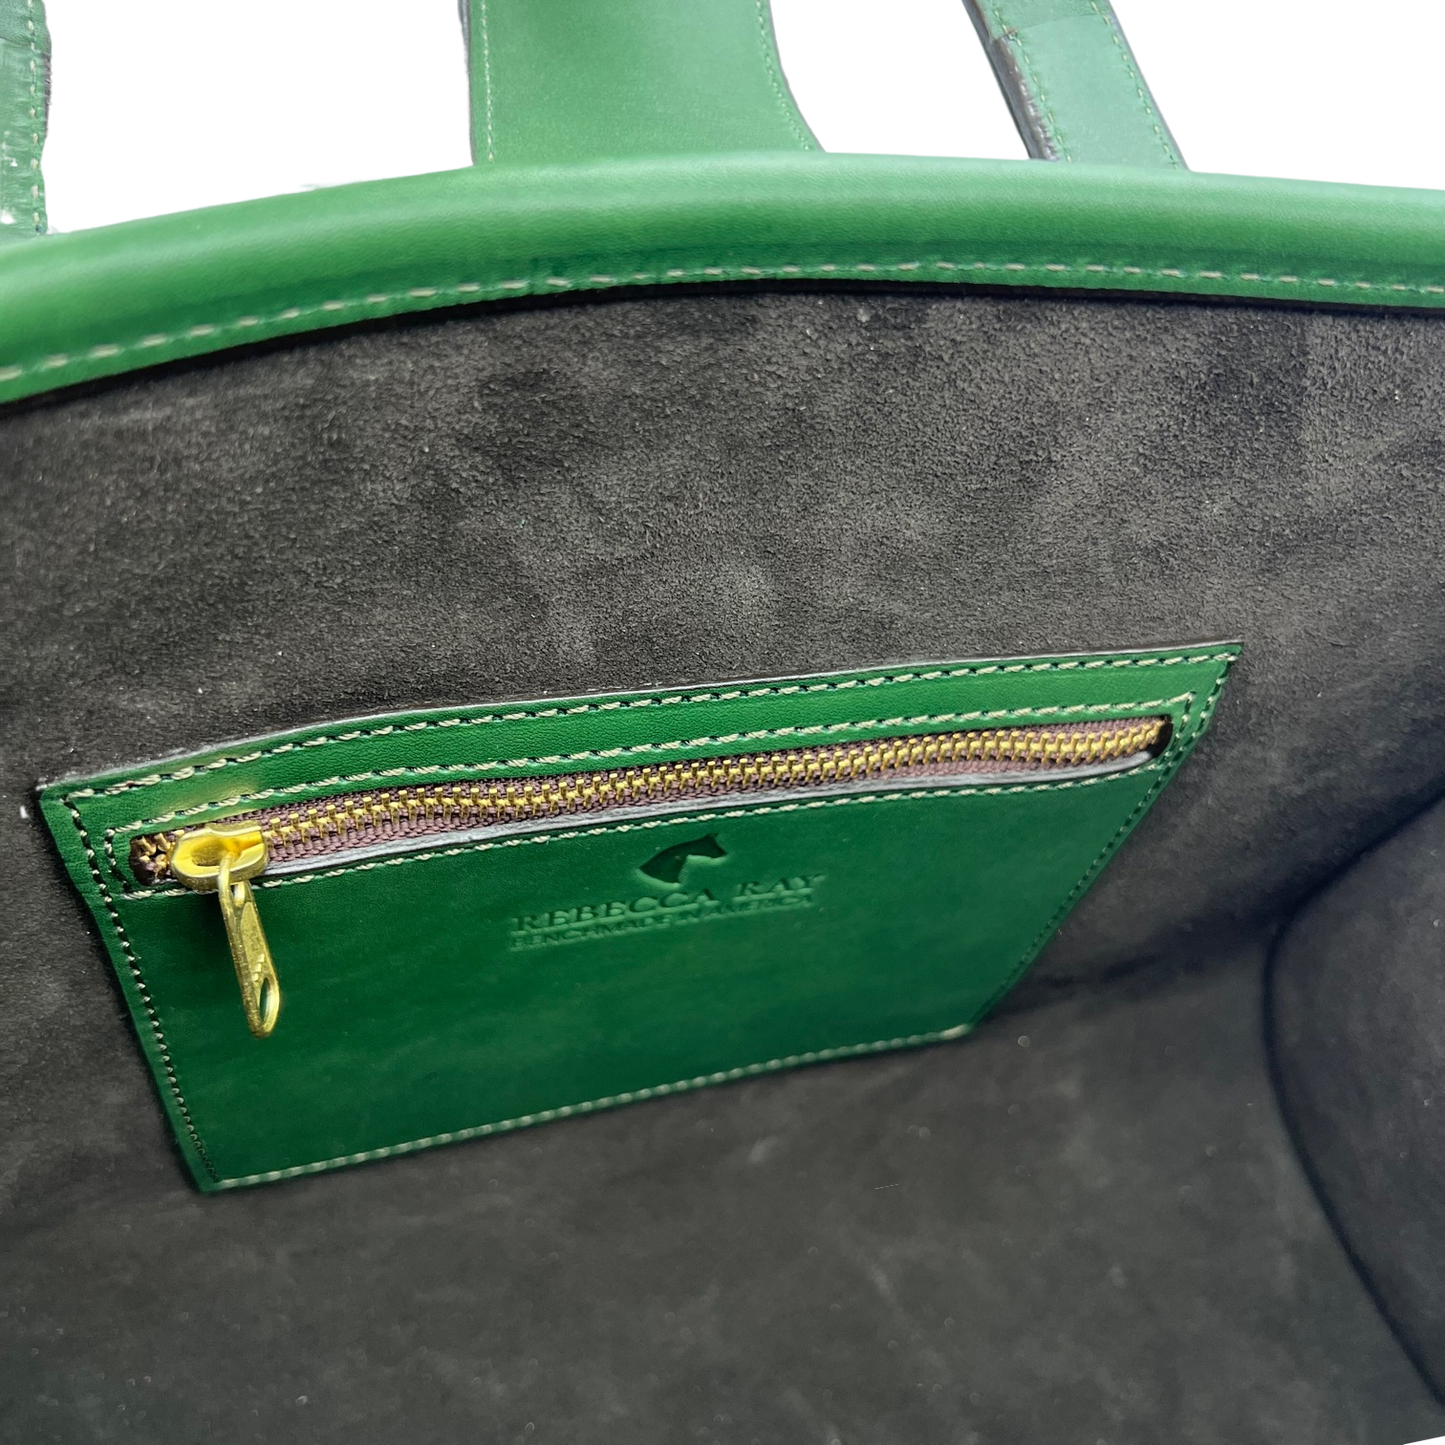 Sally Handbag in Zucchini Bridle Leather- 2 options